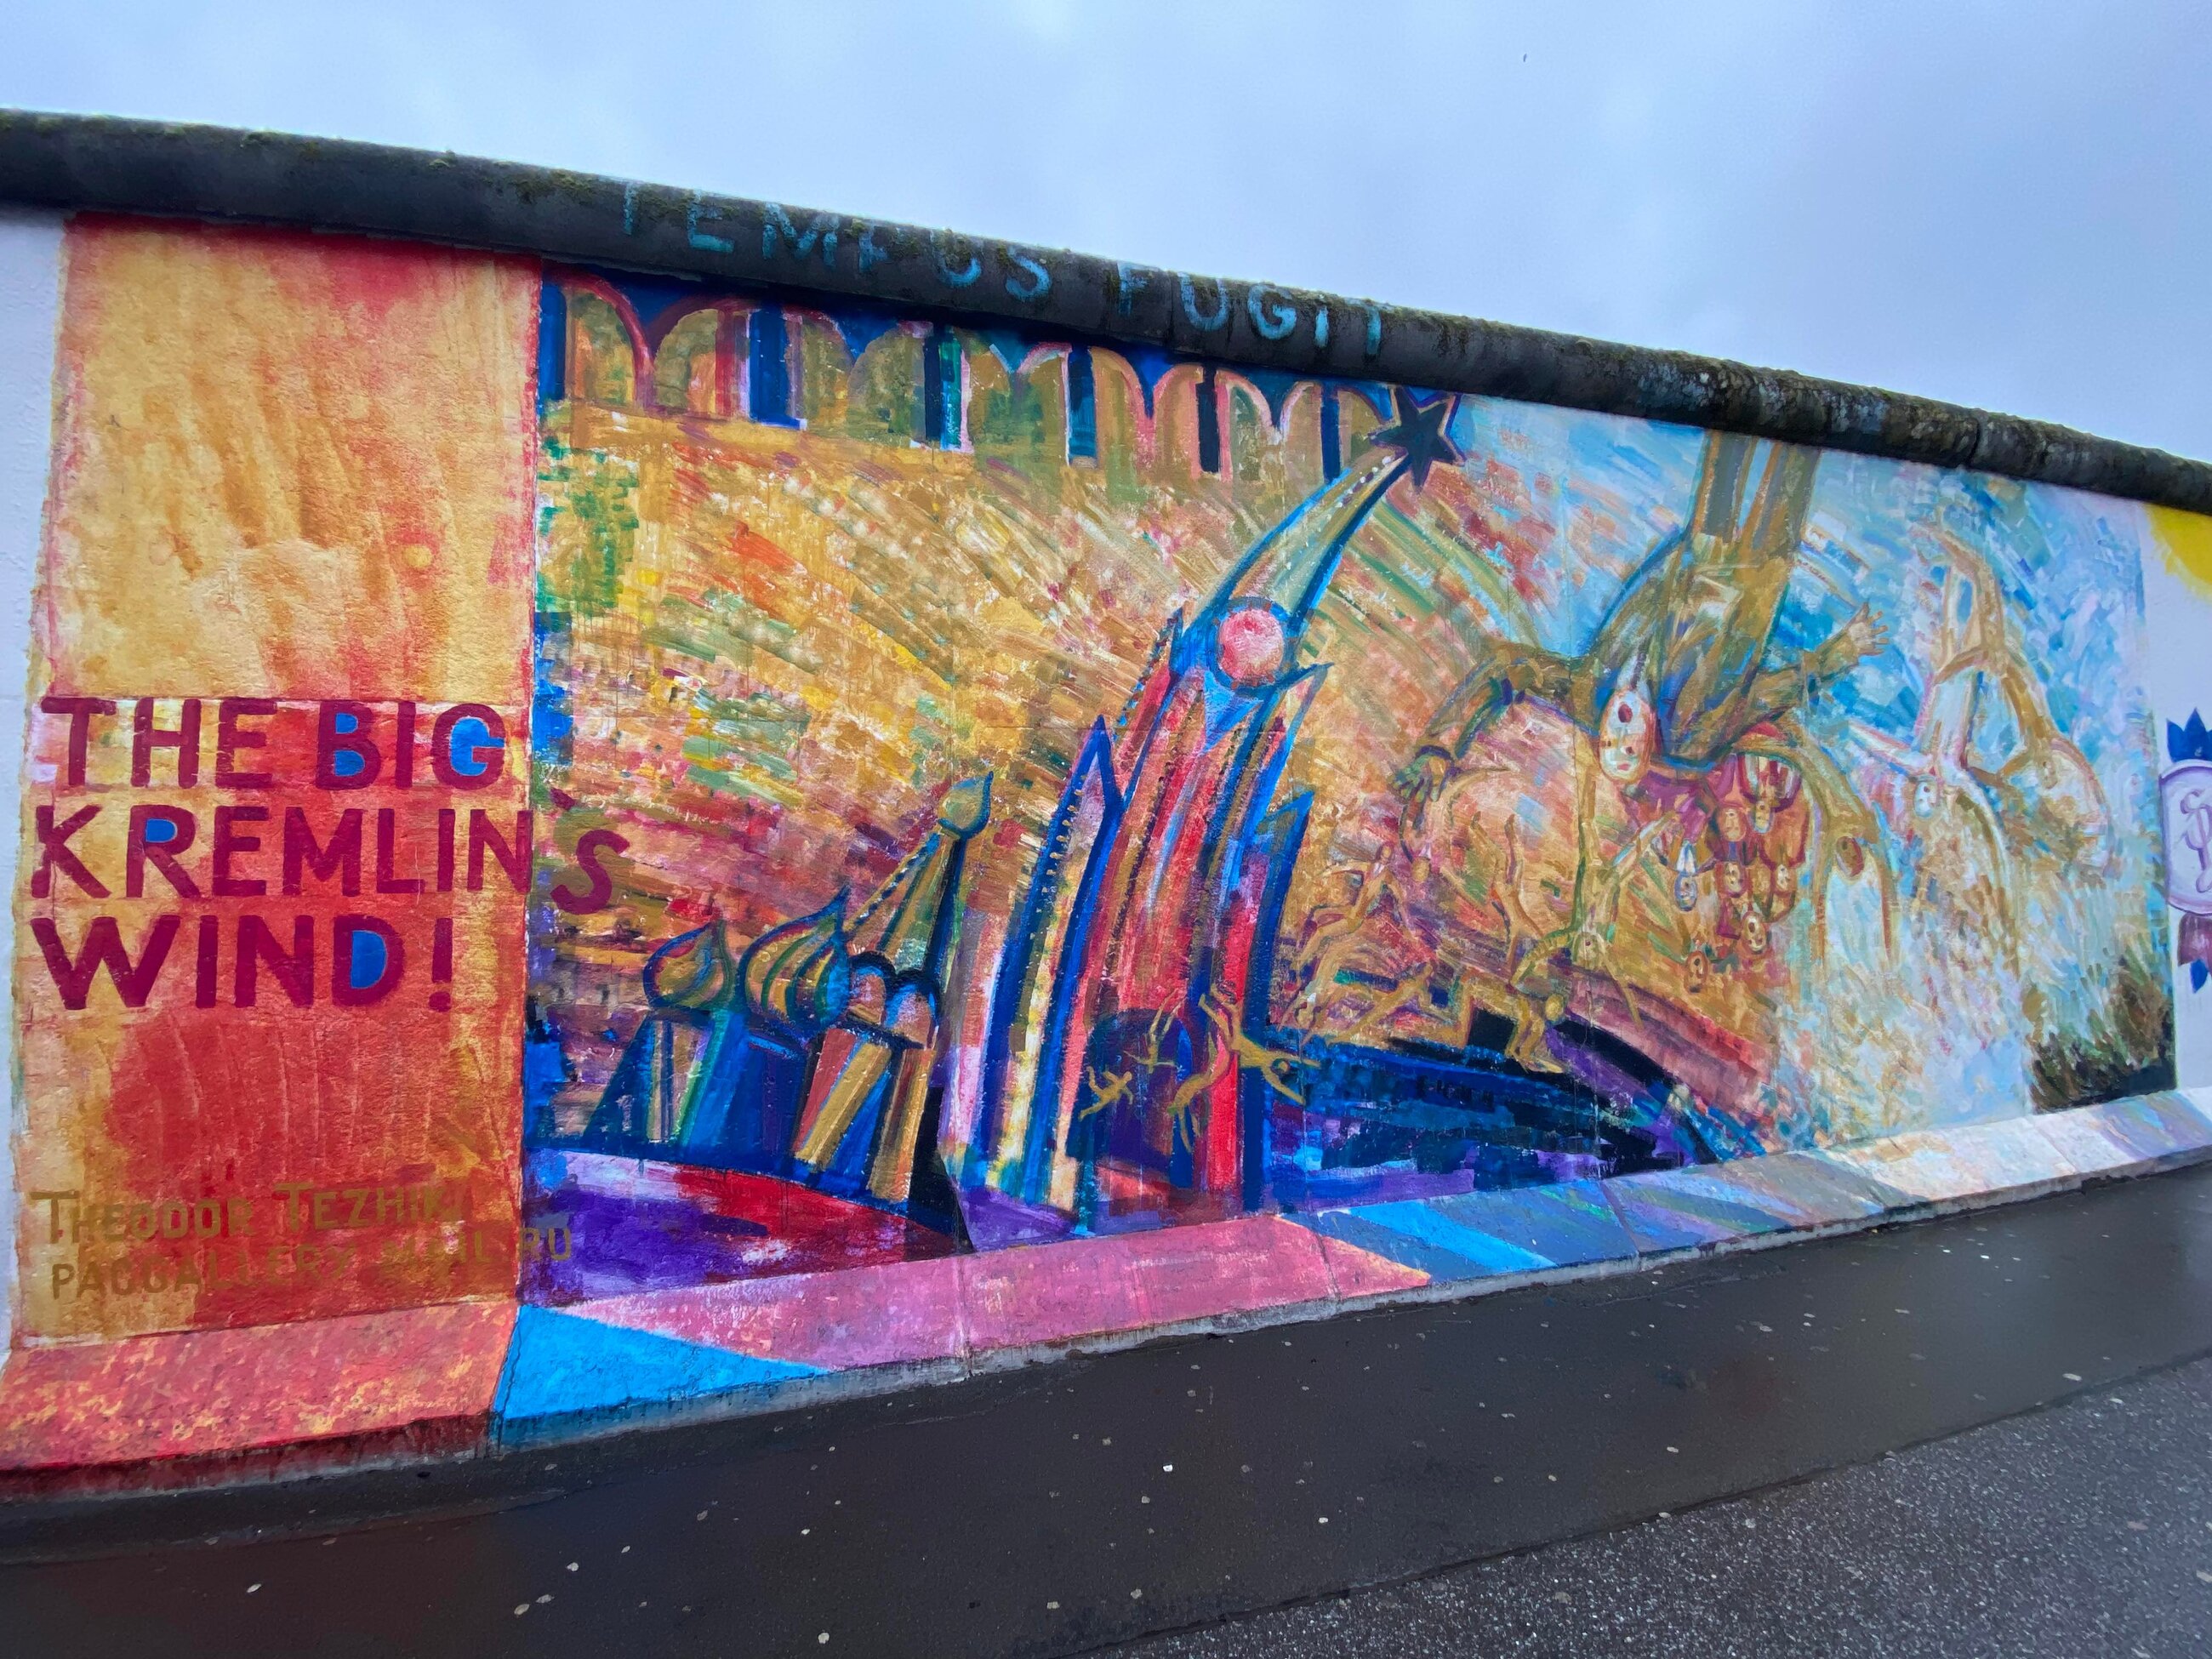 Part of East Side Gallery